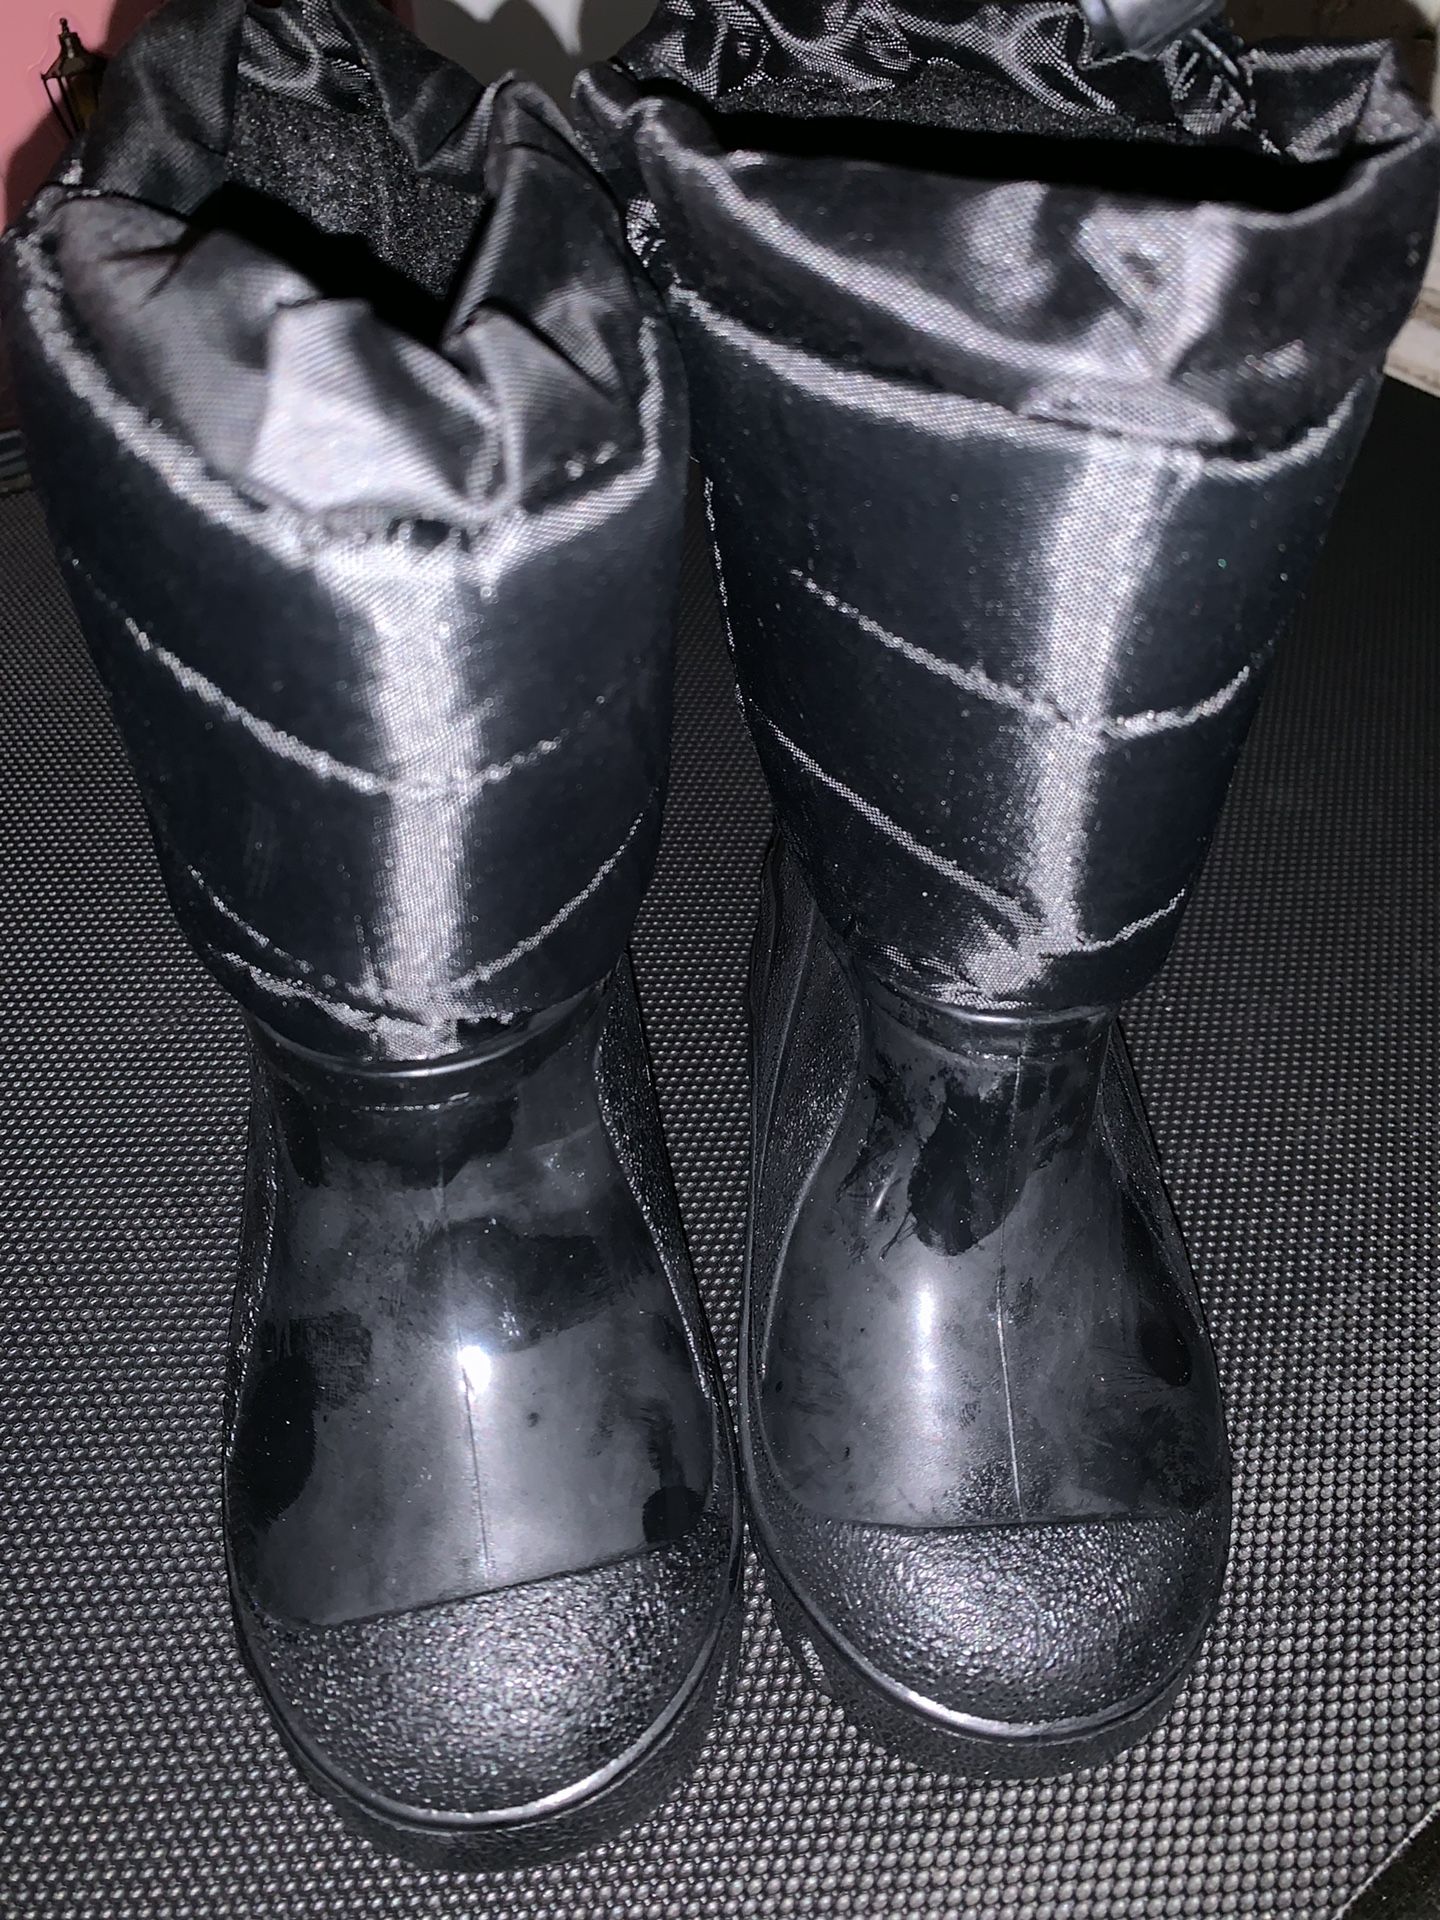 Boys or Girls Winter ❄️ Boots ( size 8)